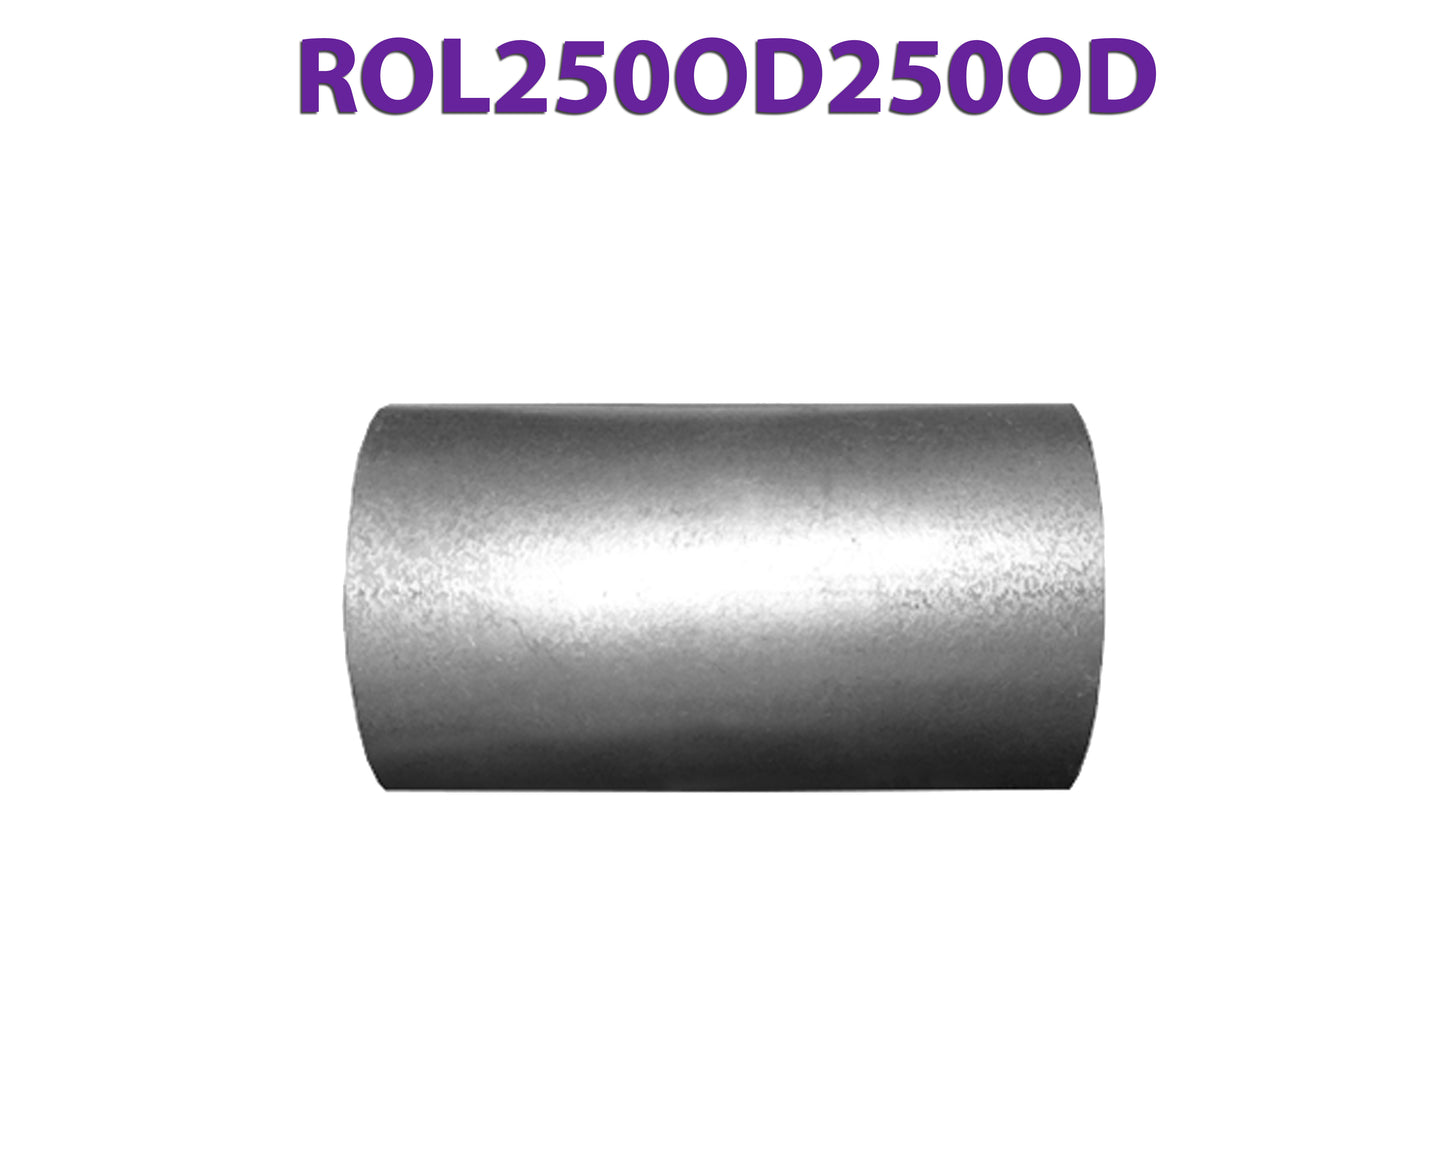 ROL250OD250OD 617570 2 1/2” OD to 2 1/2” OD Universal Exhaust Component to Component Insert Coupling